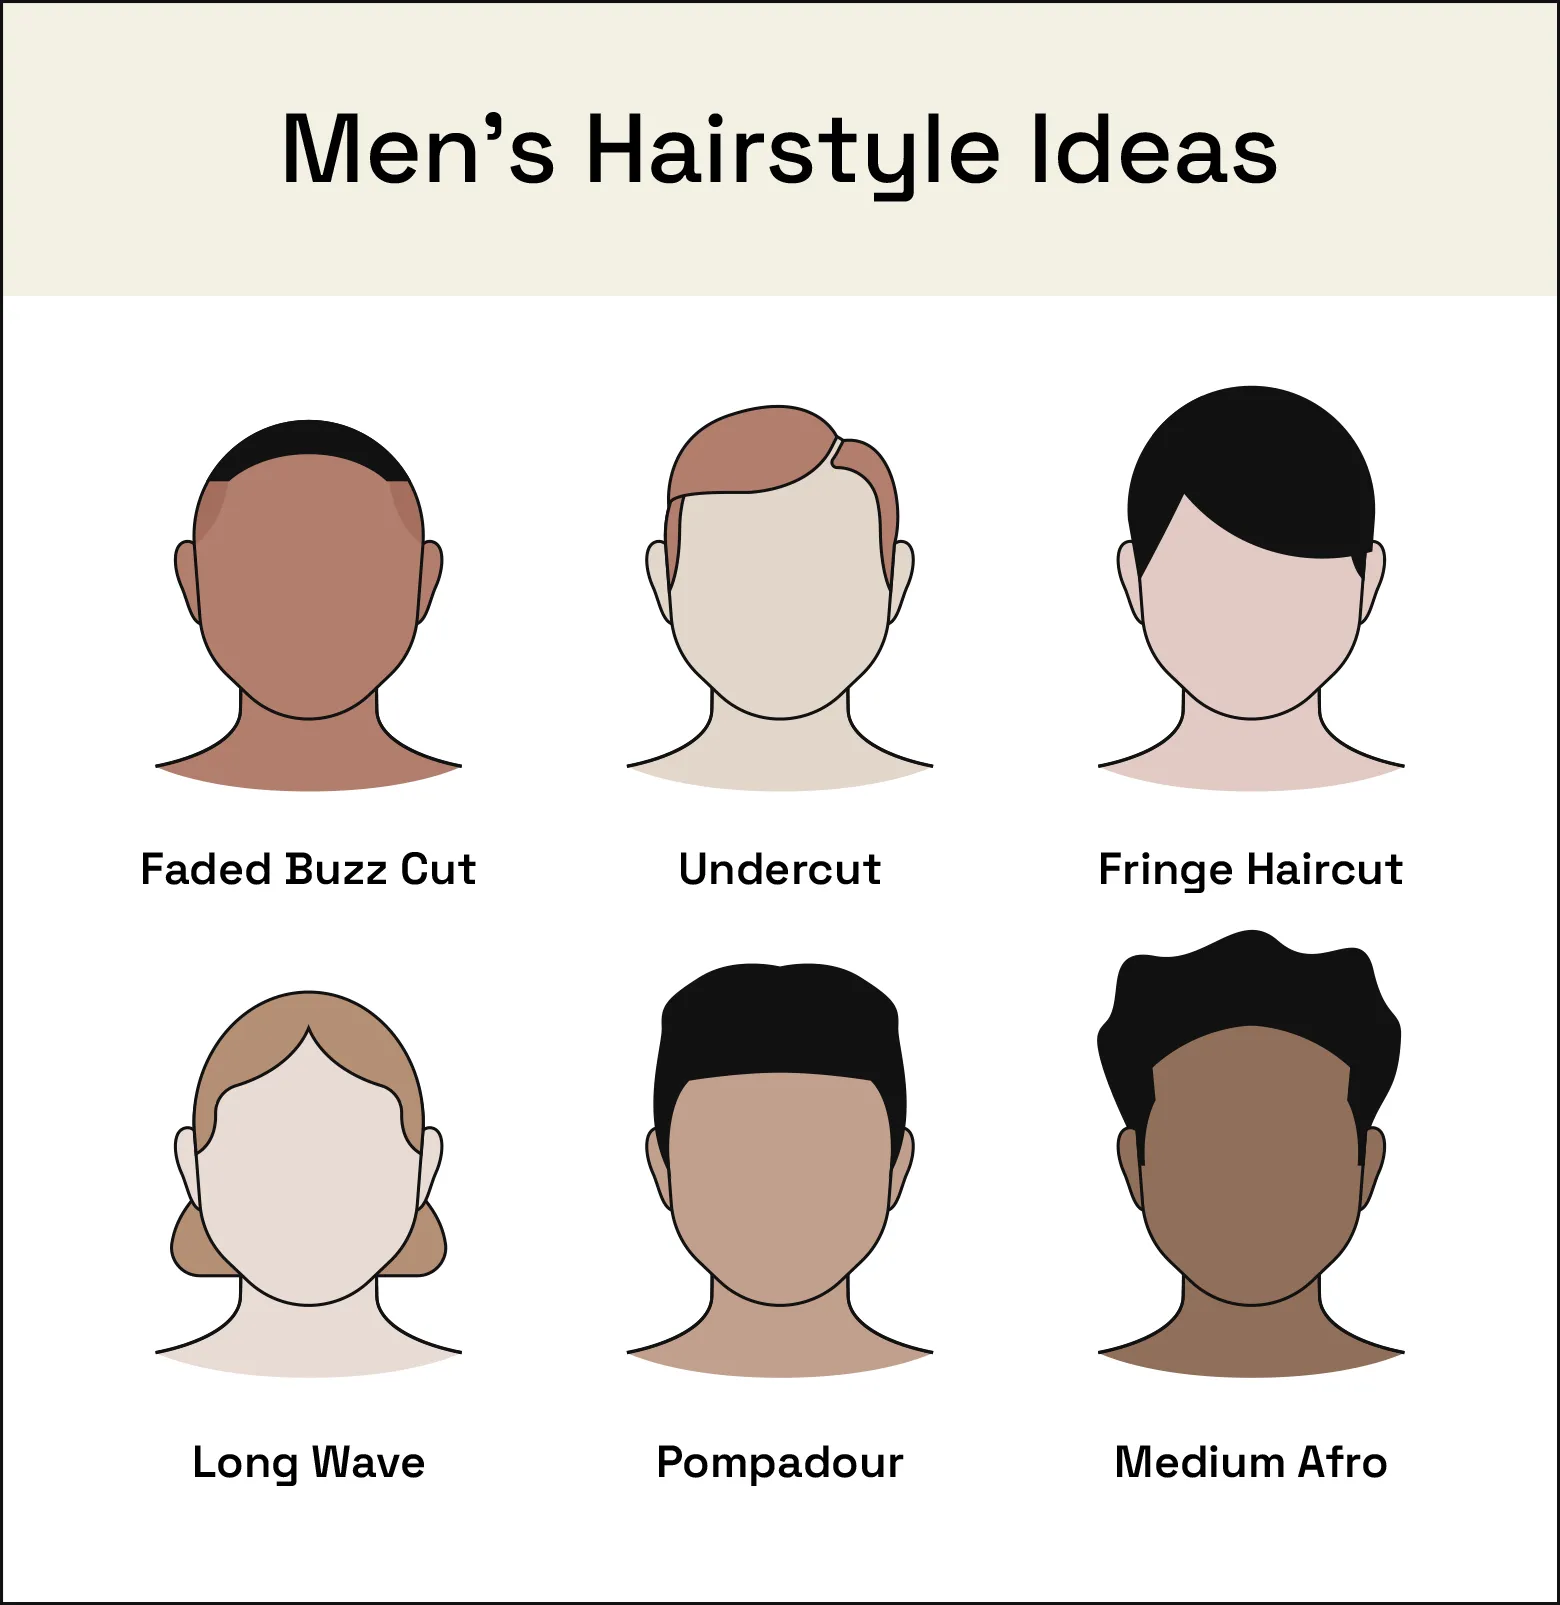 Image shows examples of different common hairstyles for men.